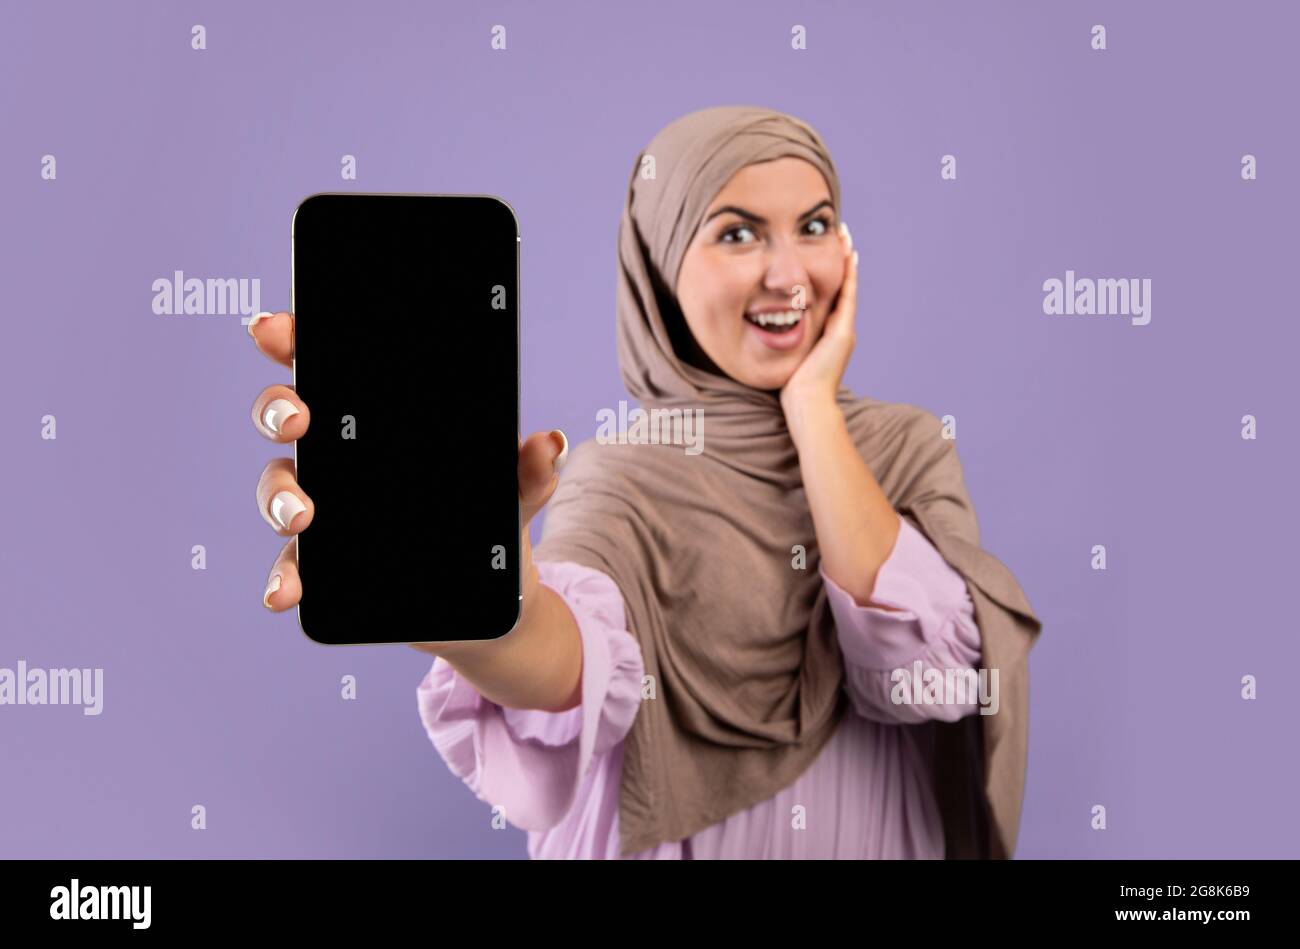 Mockup image of smartphone with black blank screen in hands of happy muslim woman in hijab over purple background Stock Photo